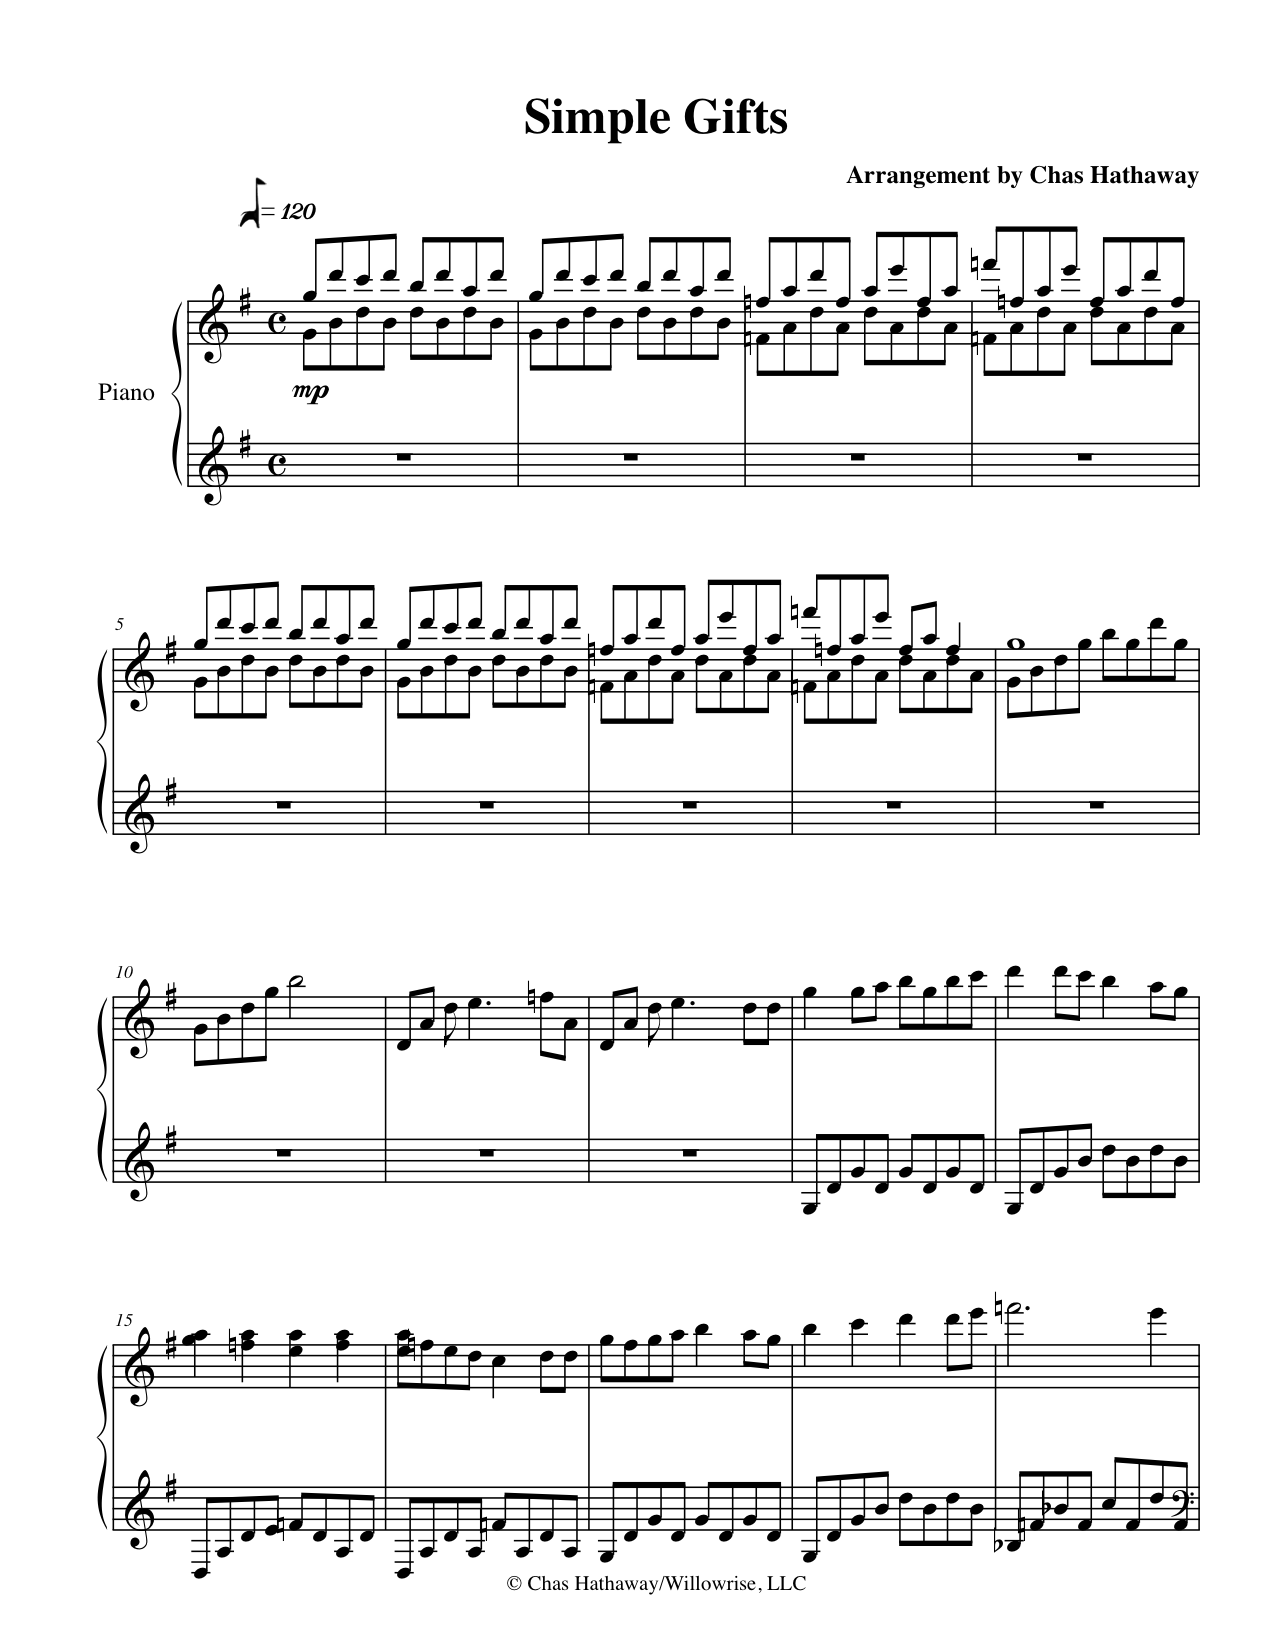 https://chashathaway.com/sheet_music/samples/simple_gifts_sample.png